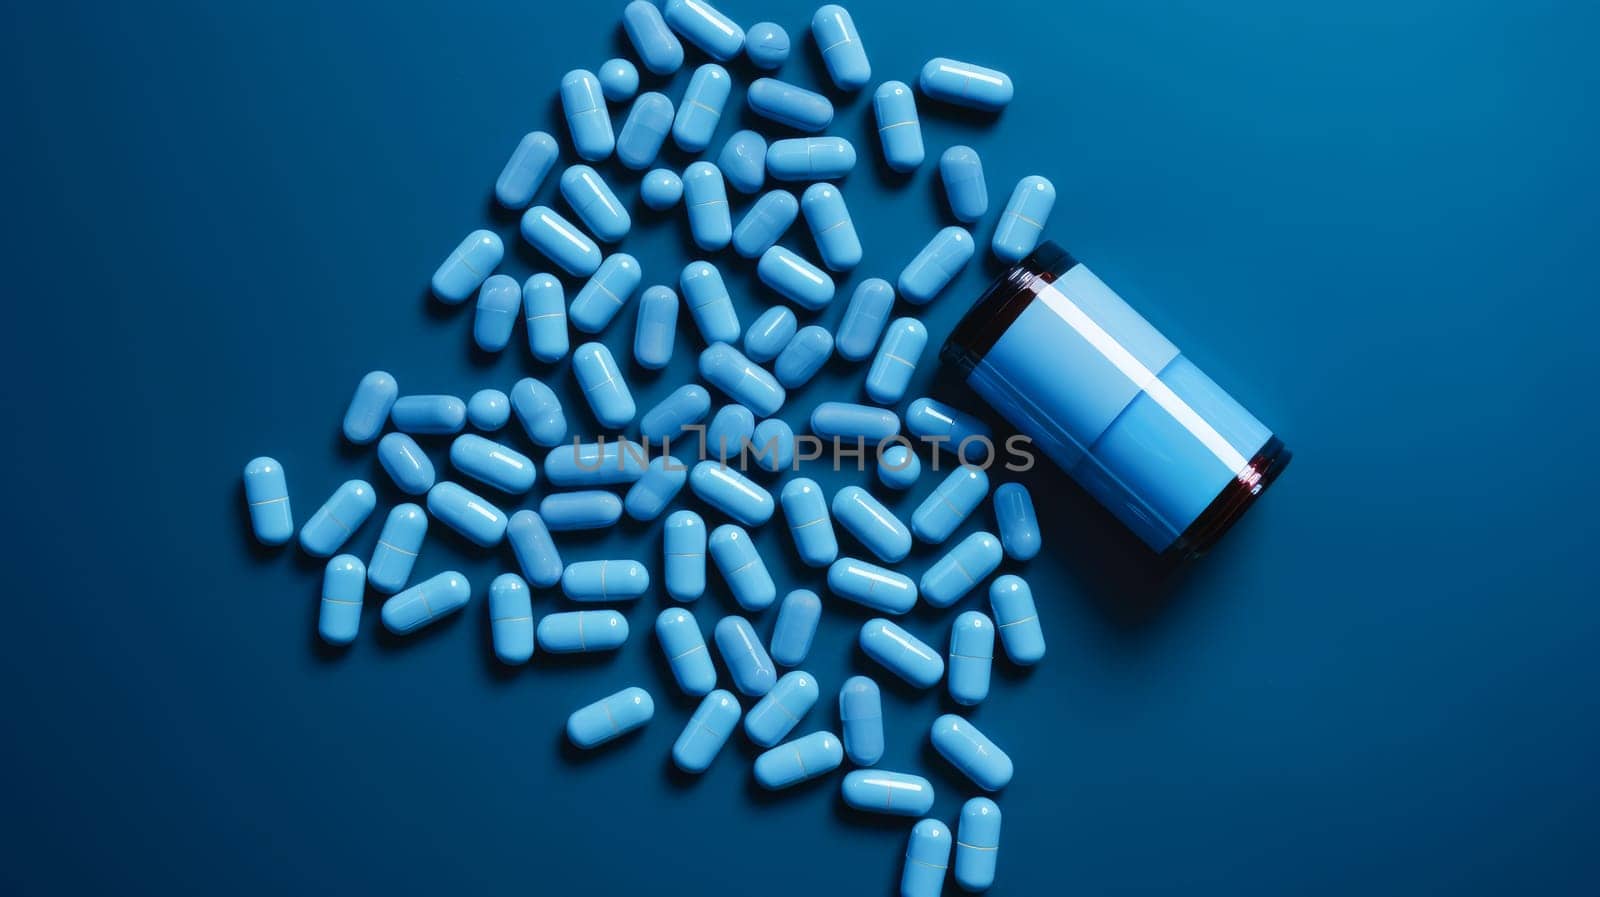 Blue pills, capsules and vitamins in a jar on a dark background. by Alla_Yurtayeva